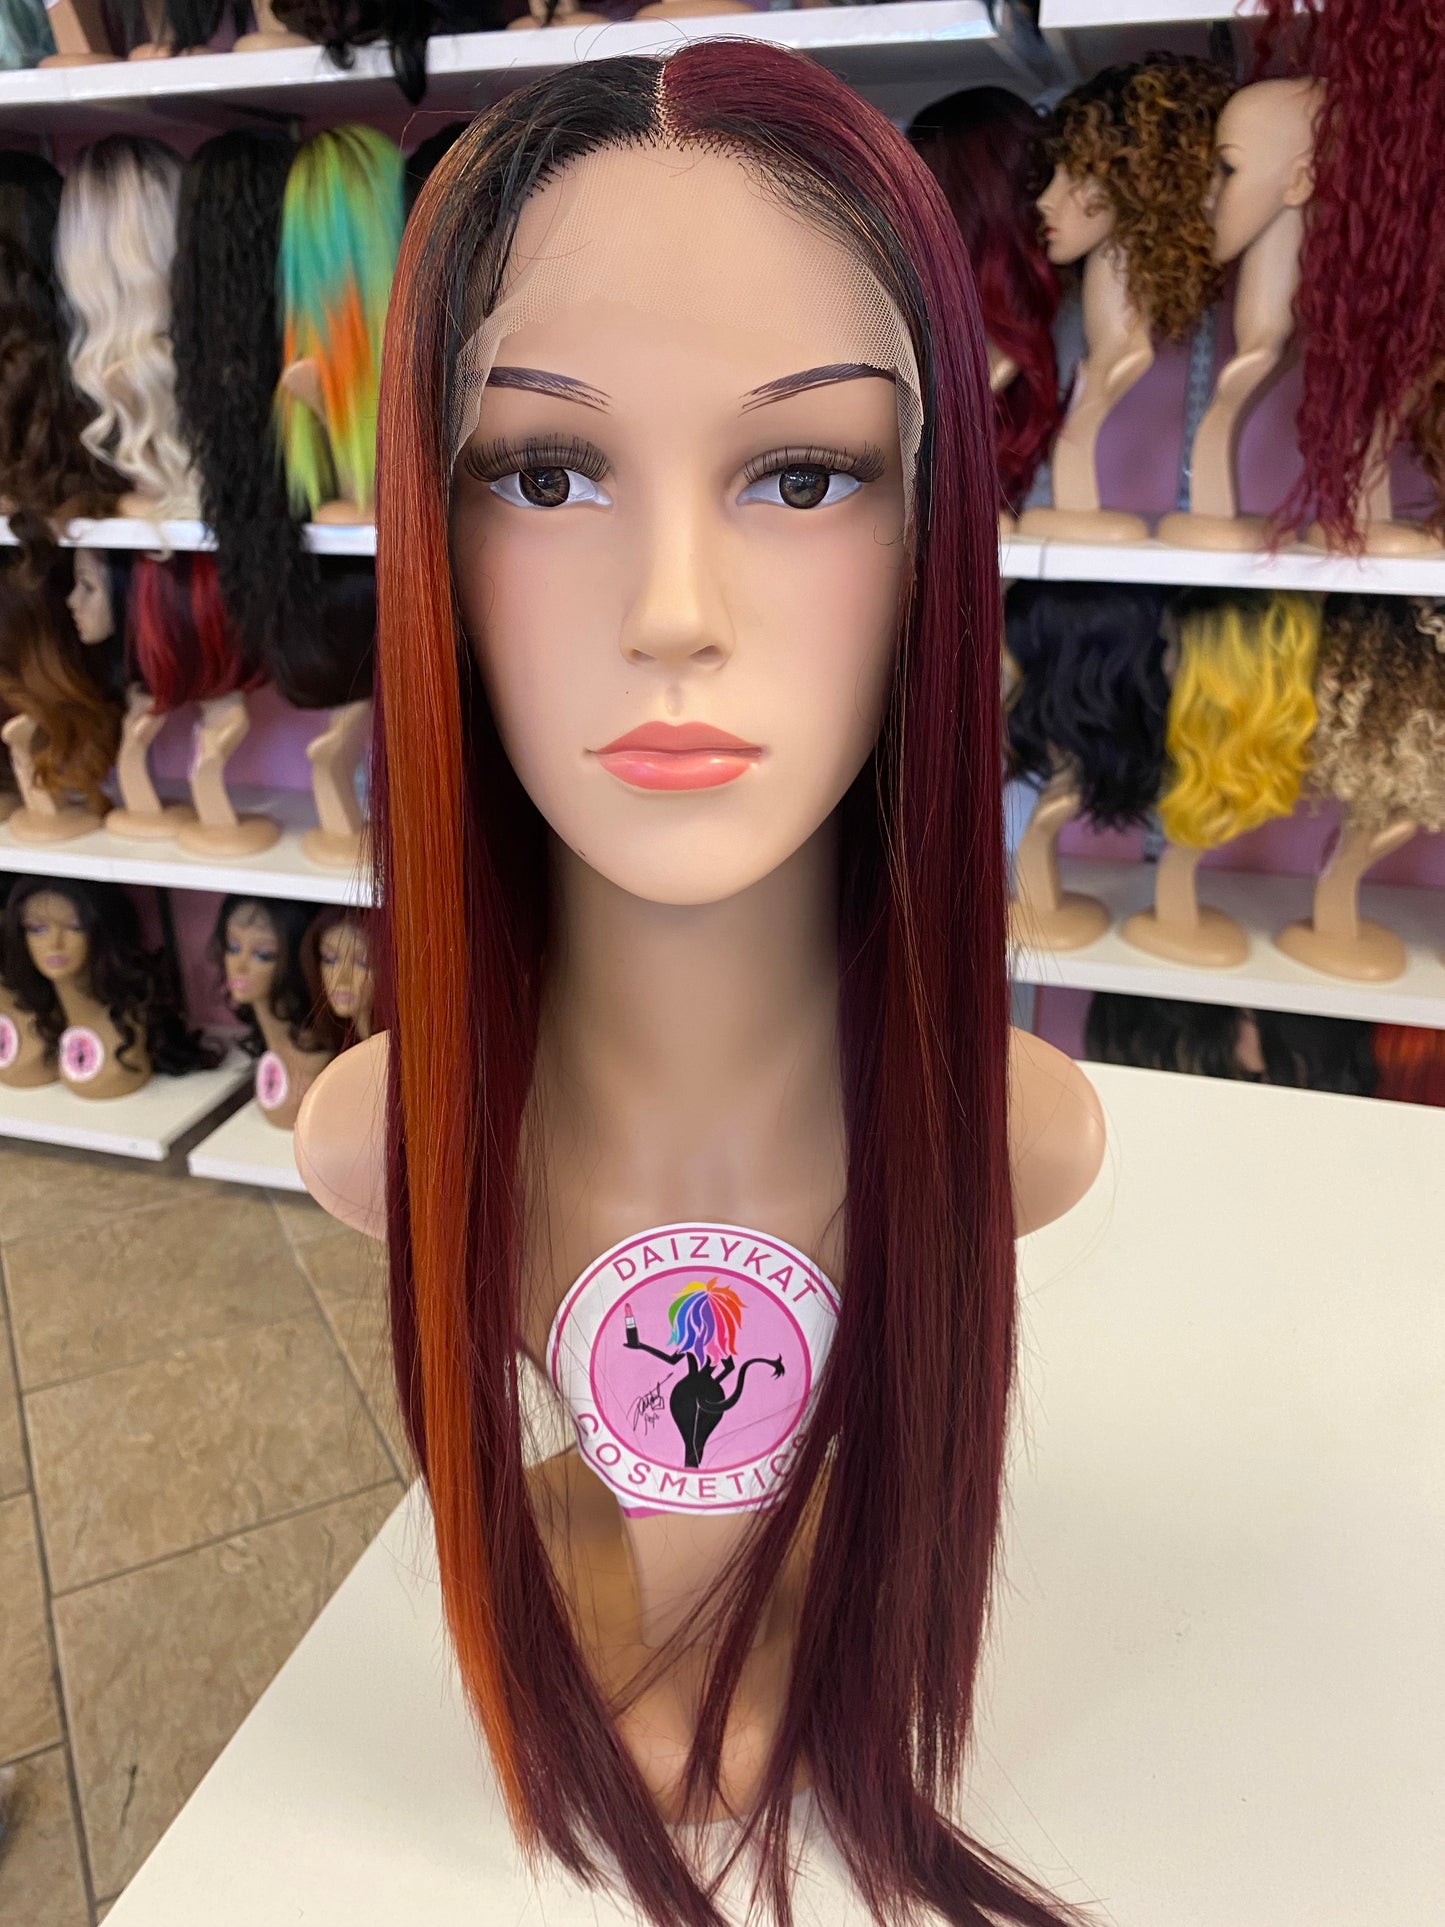 316 Nora - Middle Part Lace Front Wig Human Hair Blend- BG/1B/ORANGE - DaizyKat Cosmetics 316 Nora - Middle Part Lace Front Wig Human Hair Blend- BG/1B/ORANGE DaizyKat Cosmetics Wigs